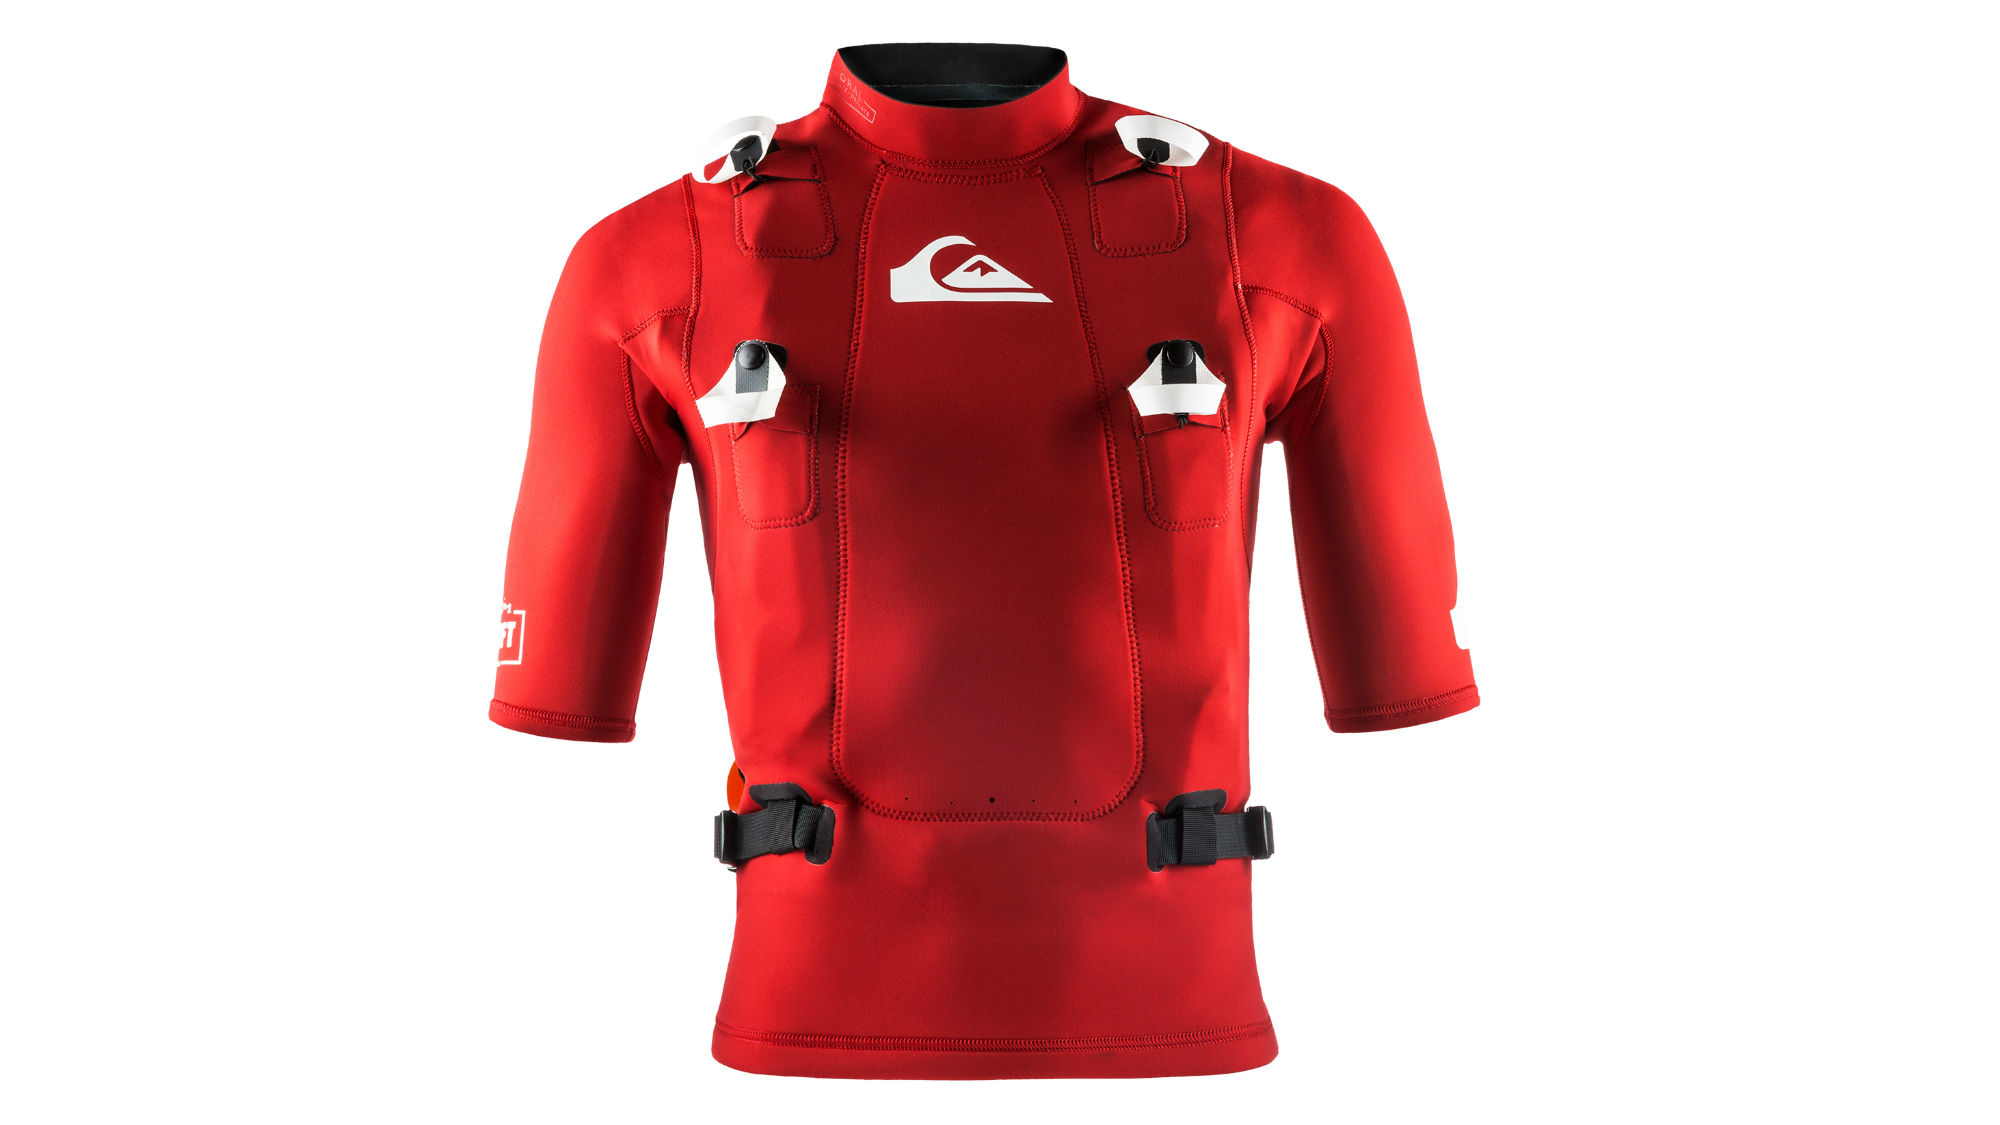 Make Little New - a Airlift Surfing Quiksilver\'s Vest The Big-Wave Safer Manual Will